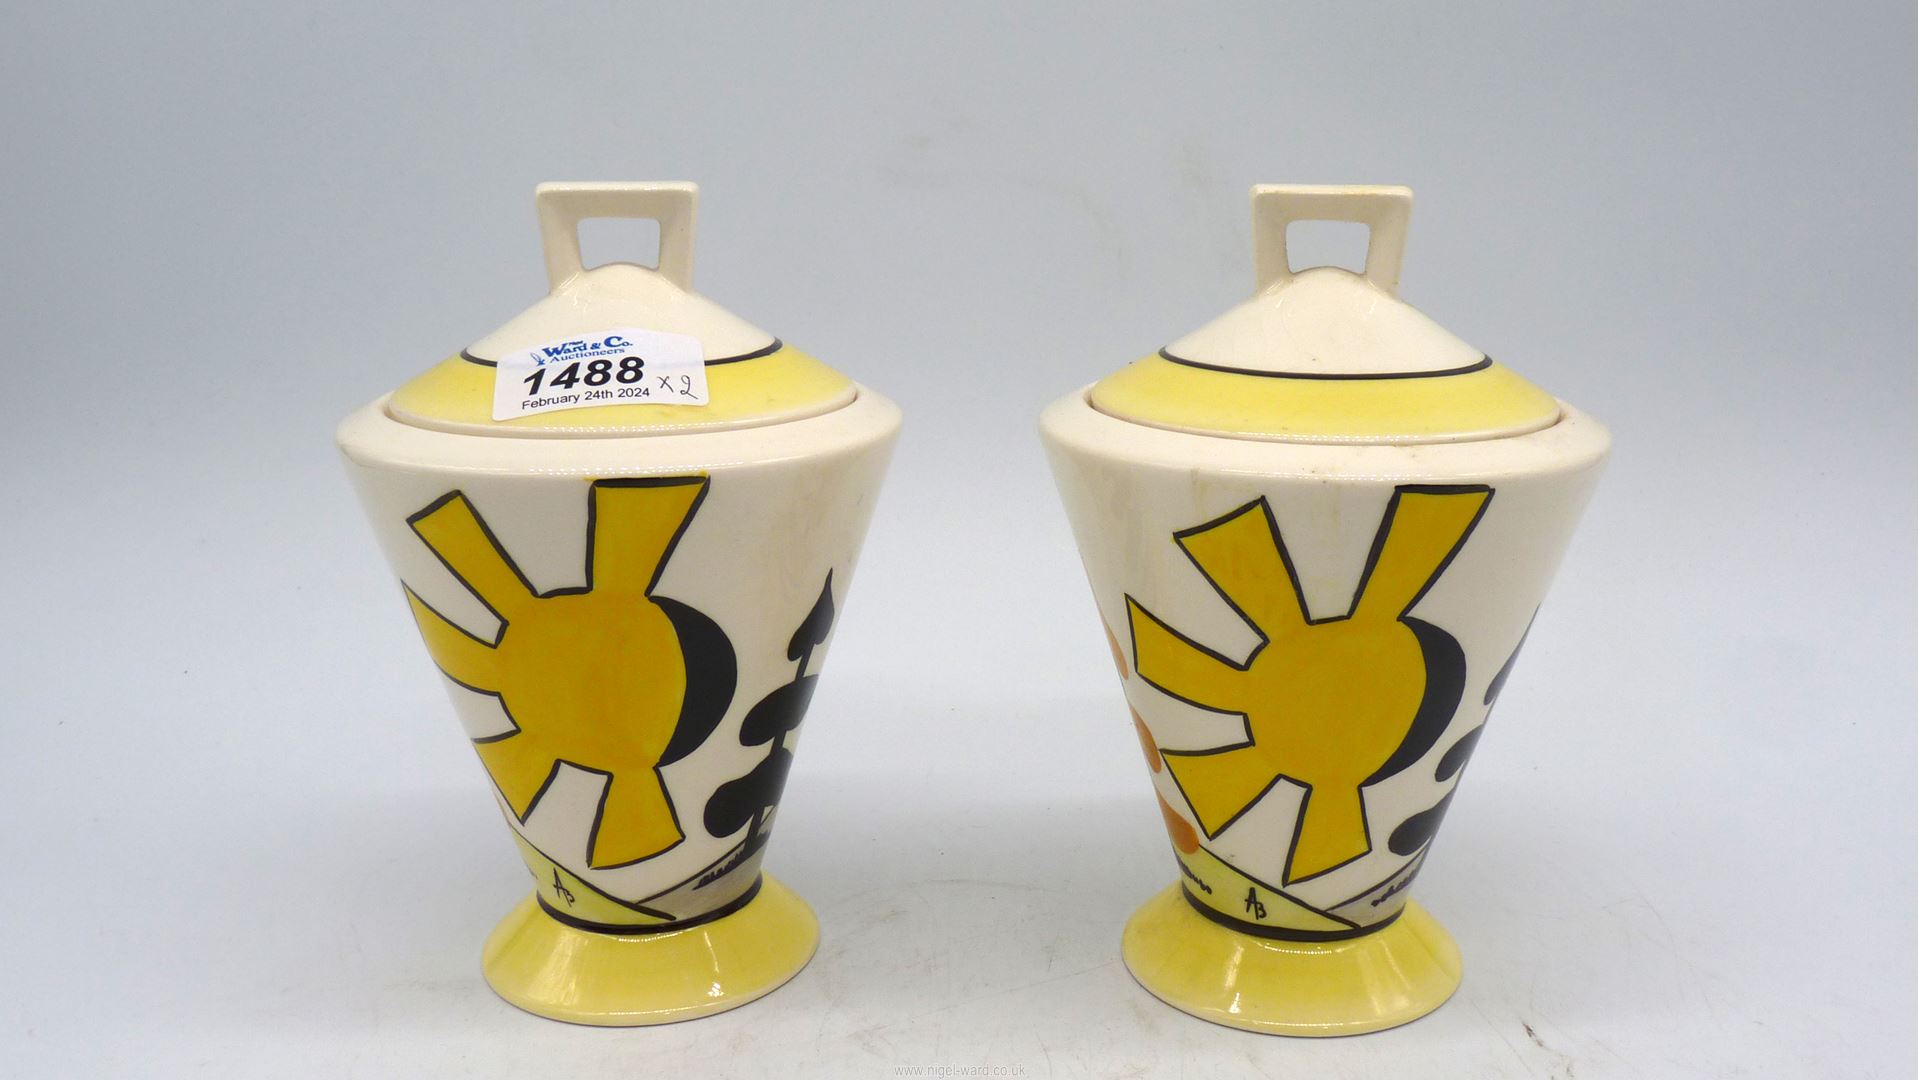 A pair of Elements of Fire lidded Pots with Day and Night pattern, 6 1/2" tall.